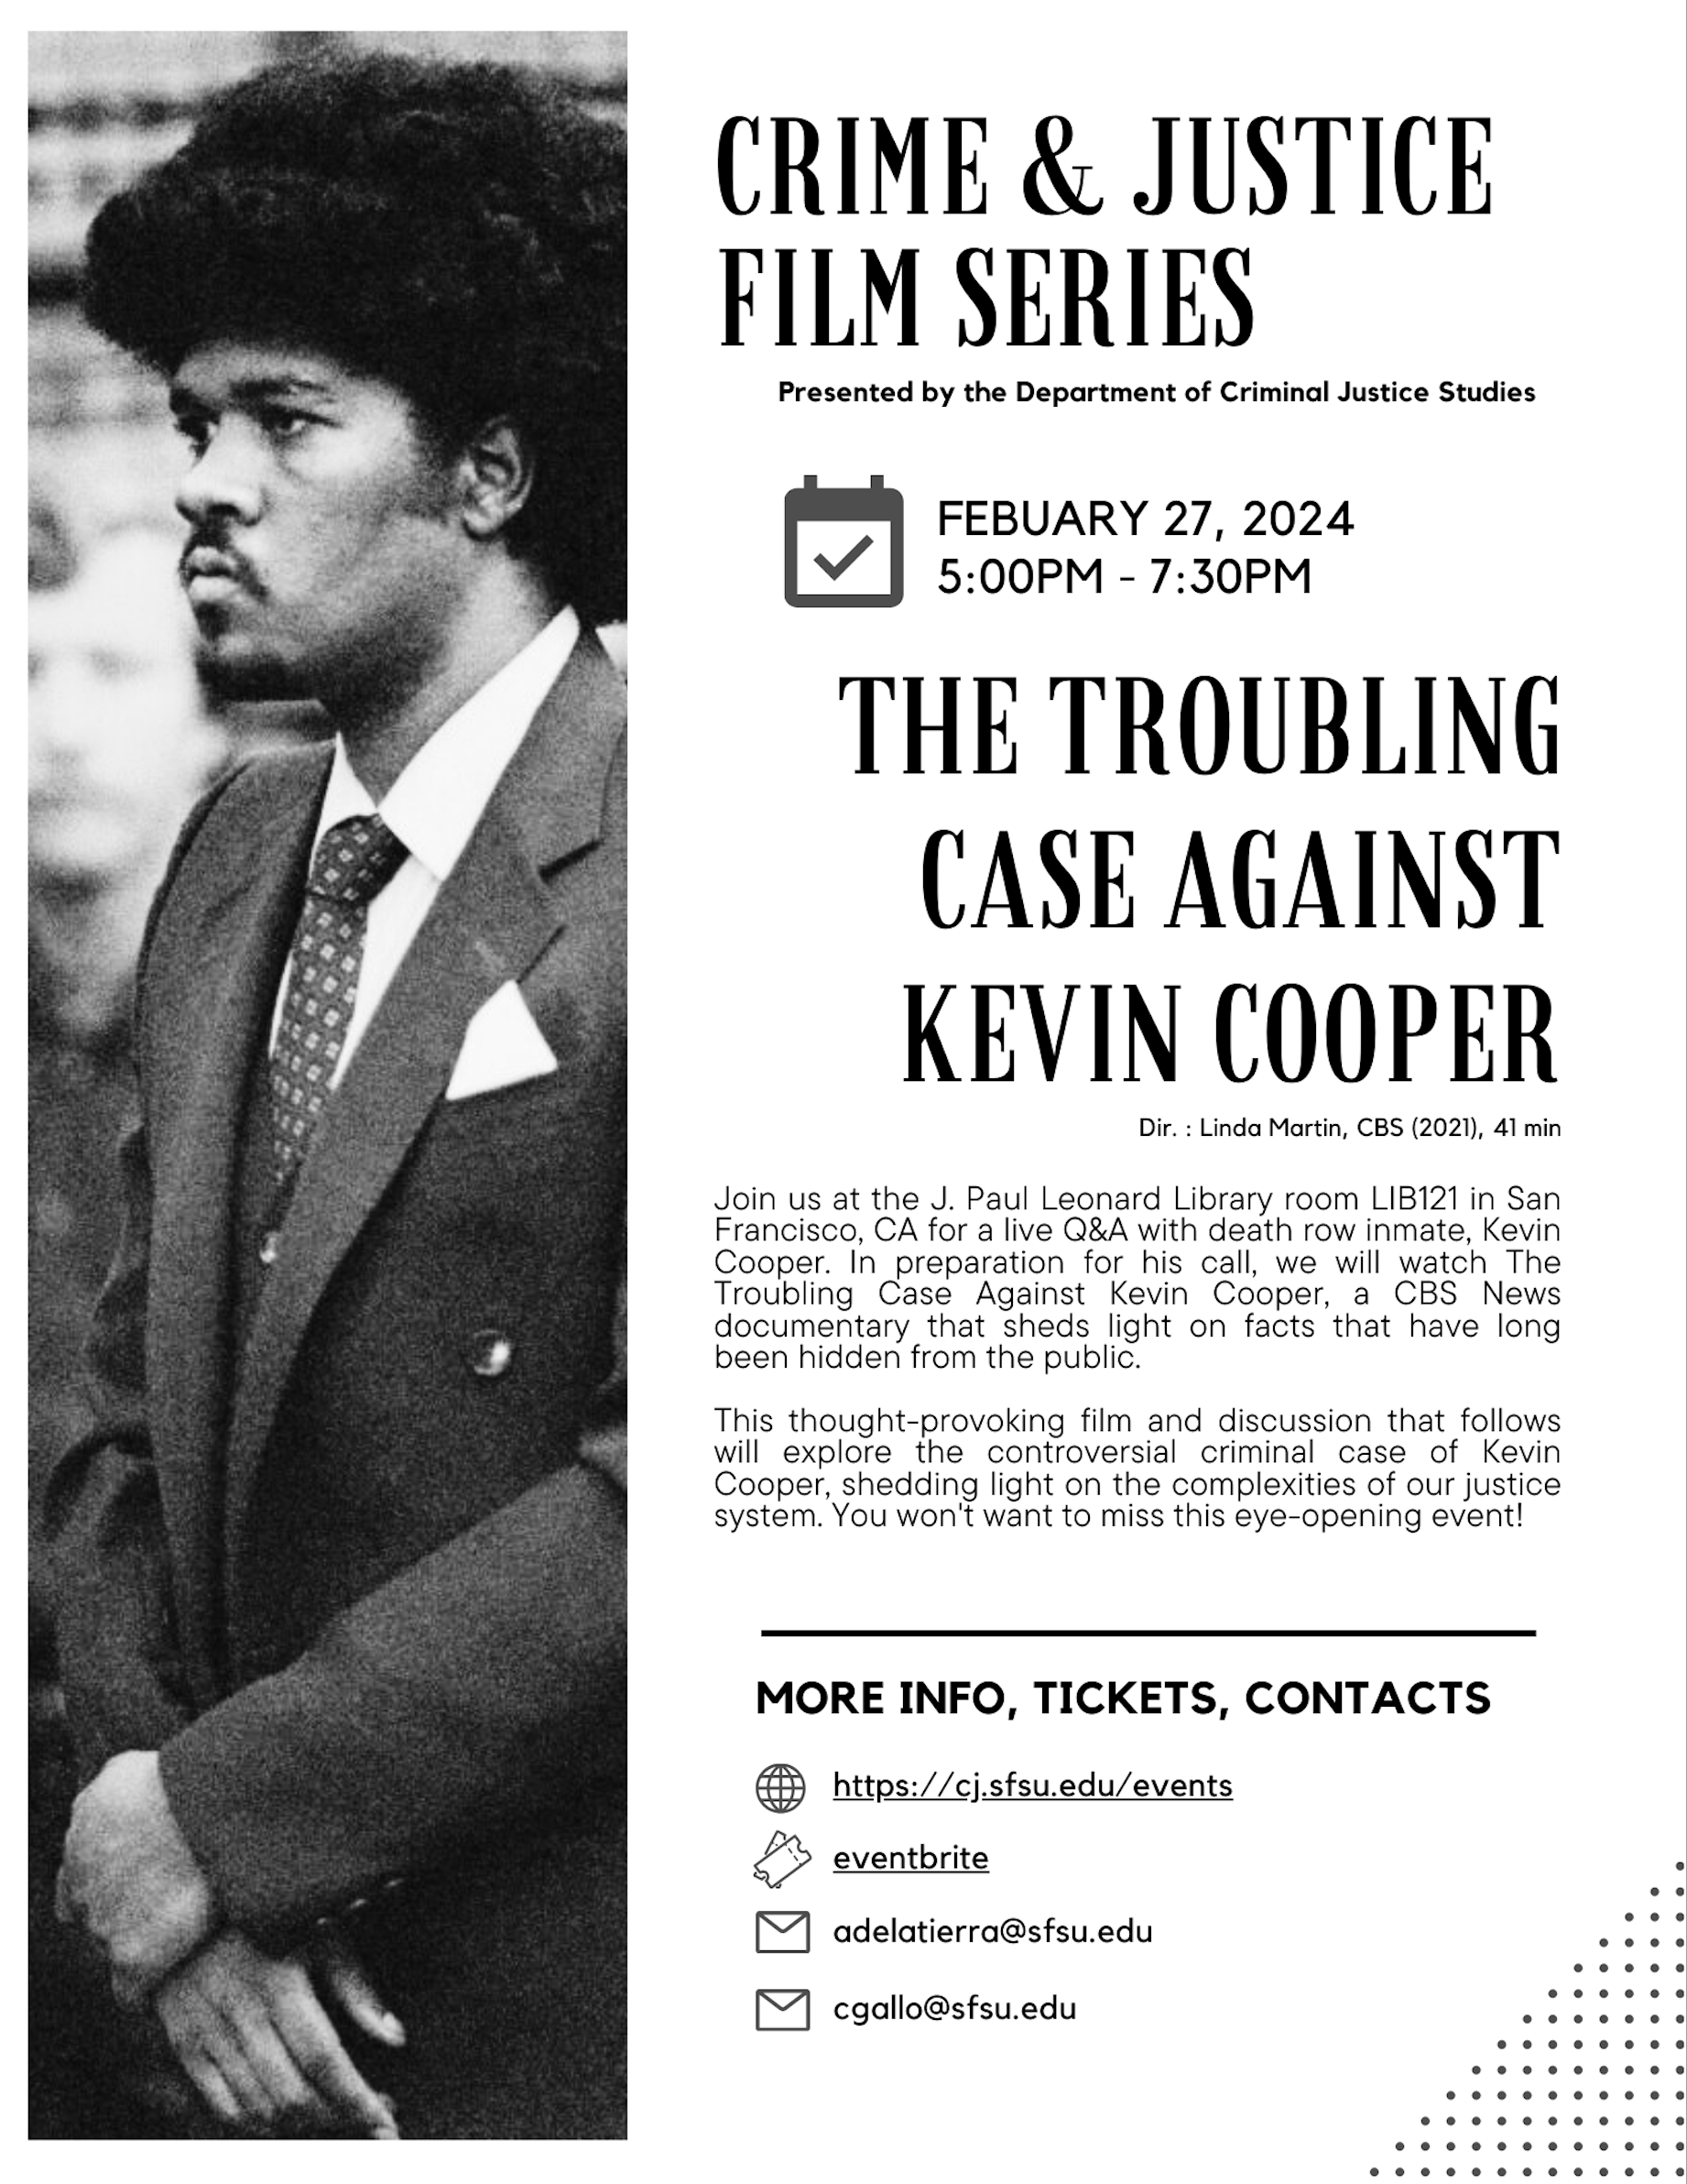 The Troubling Case Against Kevin Cooper